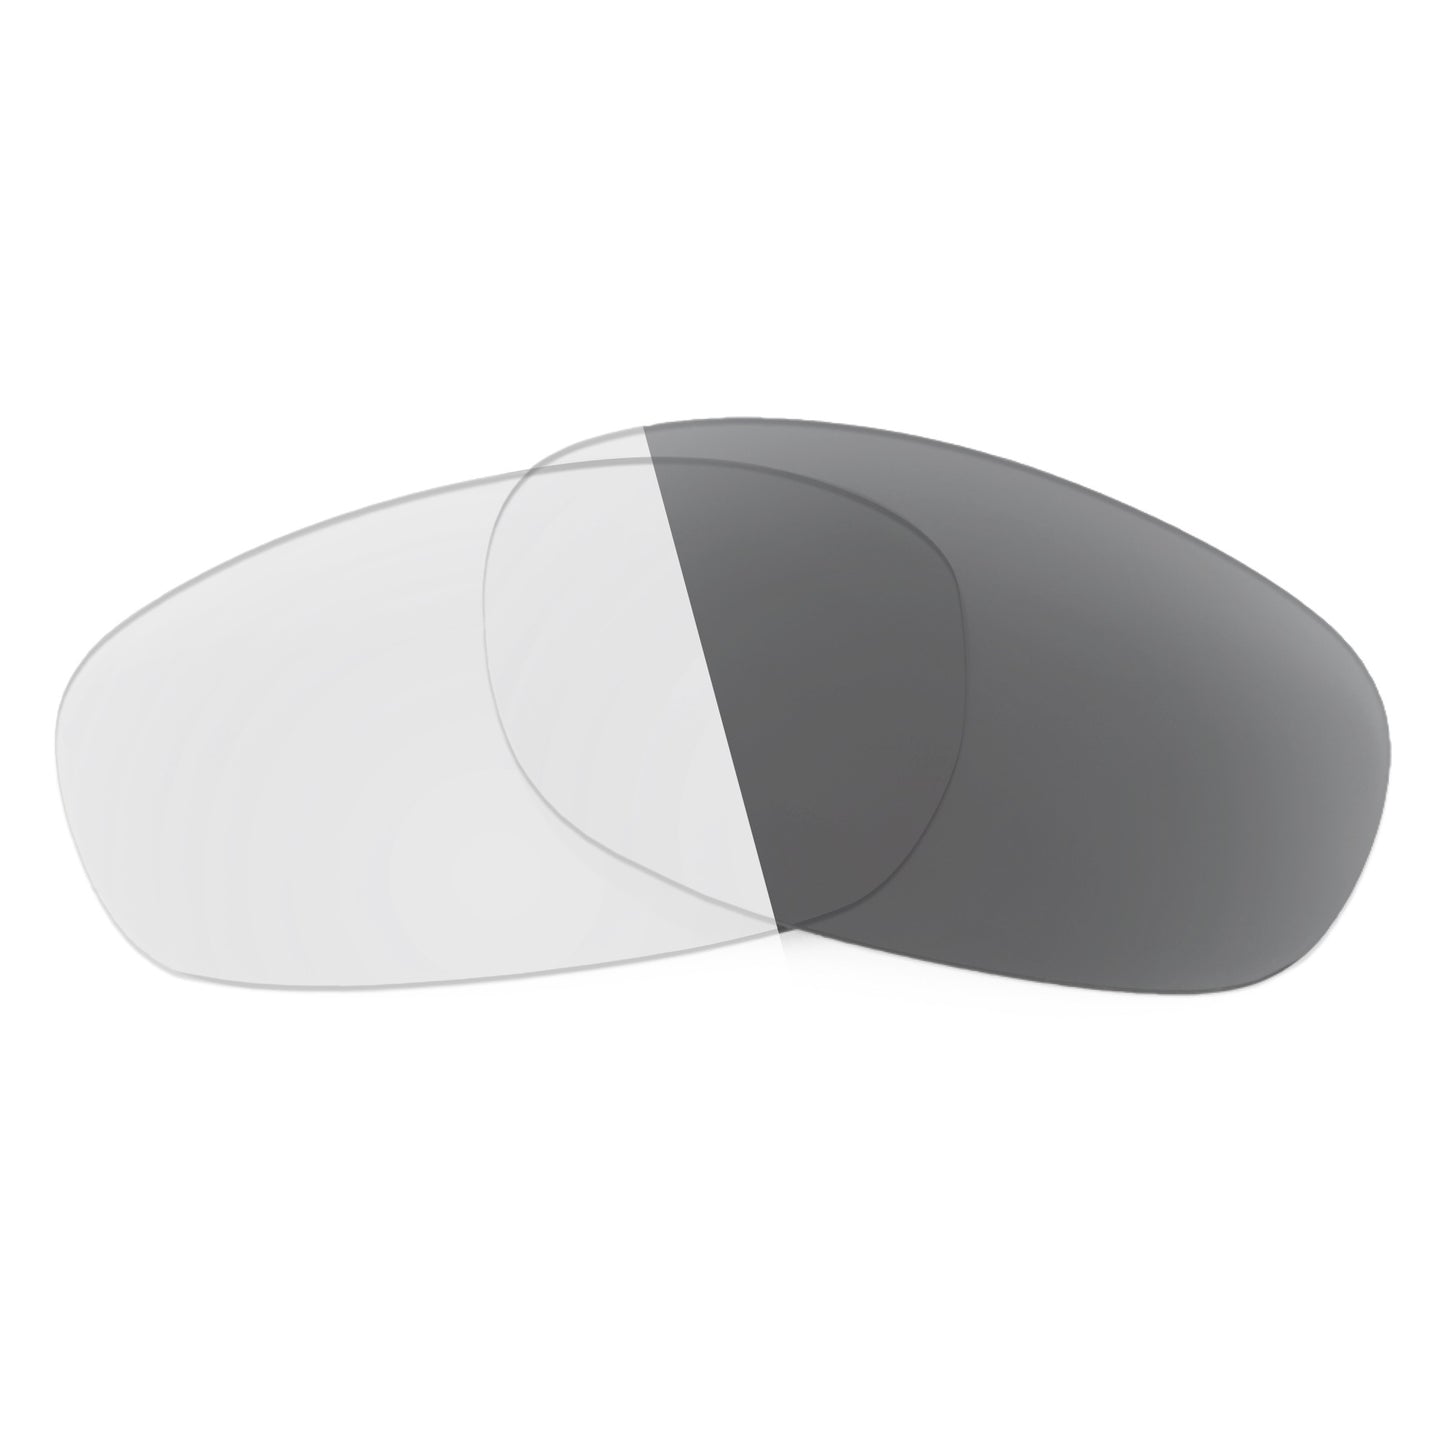 Revant replacement lenses for VonZipper Ling Ling Non-Polarized Adapt Gray Photochromic